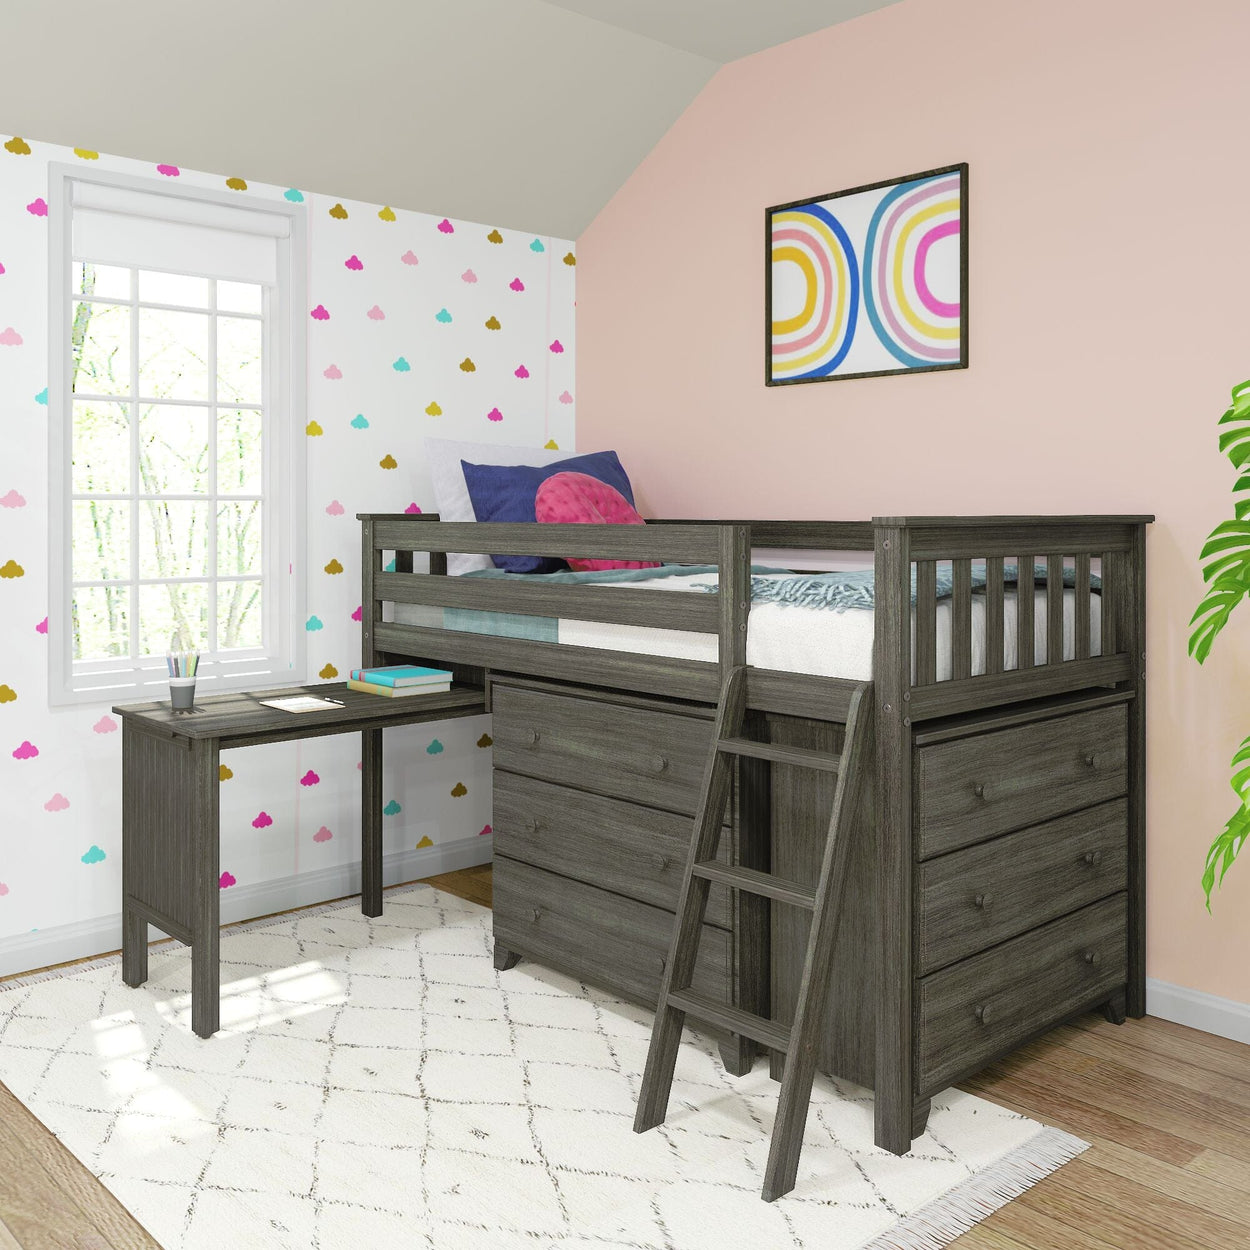 18-3D3DDK-151 : Loft Beds Twin-Size Low Loft with Pull-Out Desk and 3-Drawer Dressers, Clay